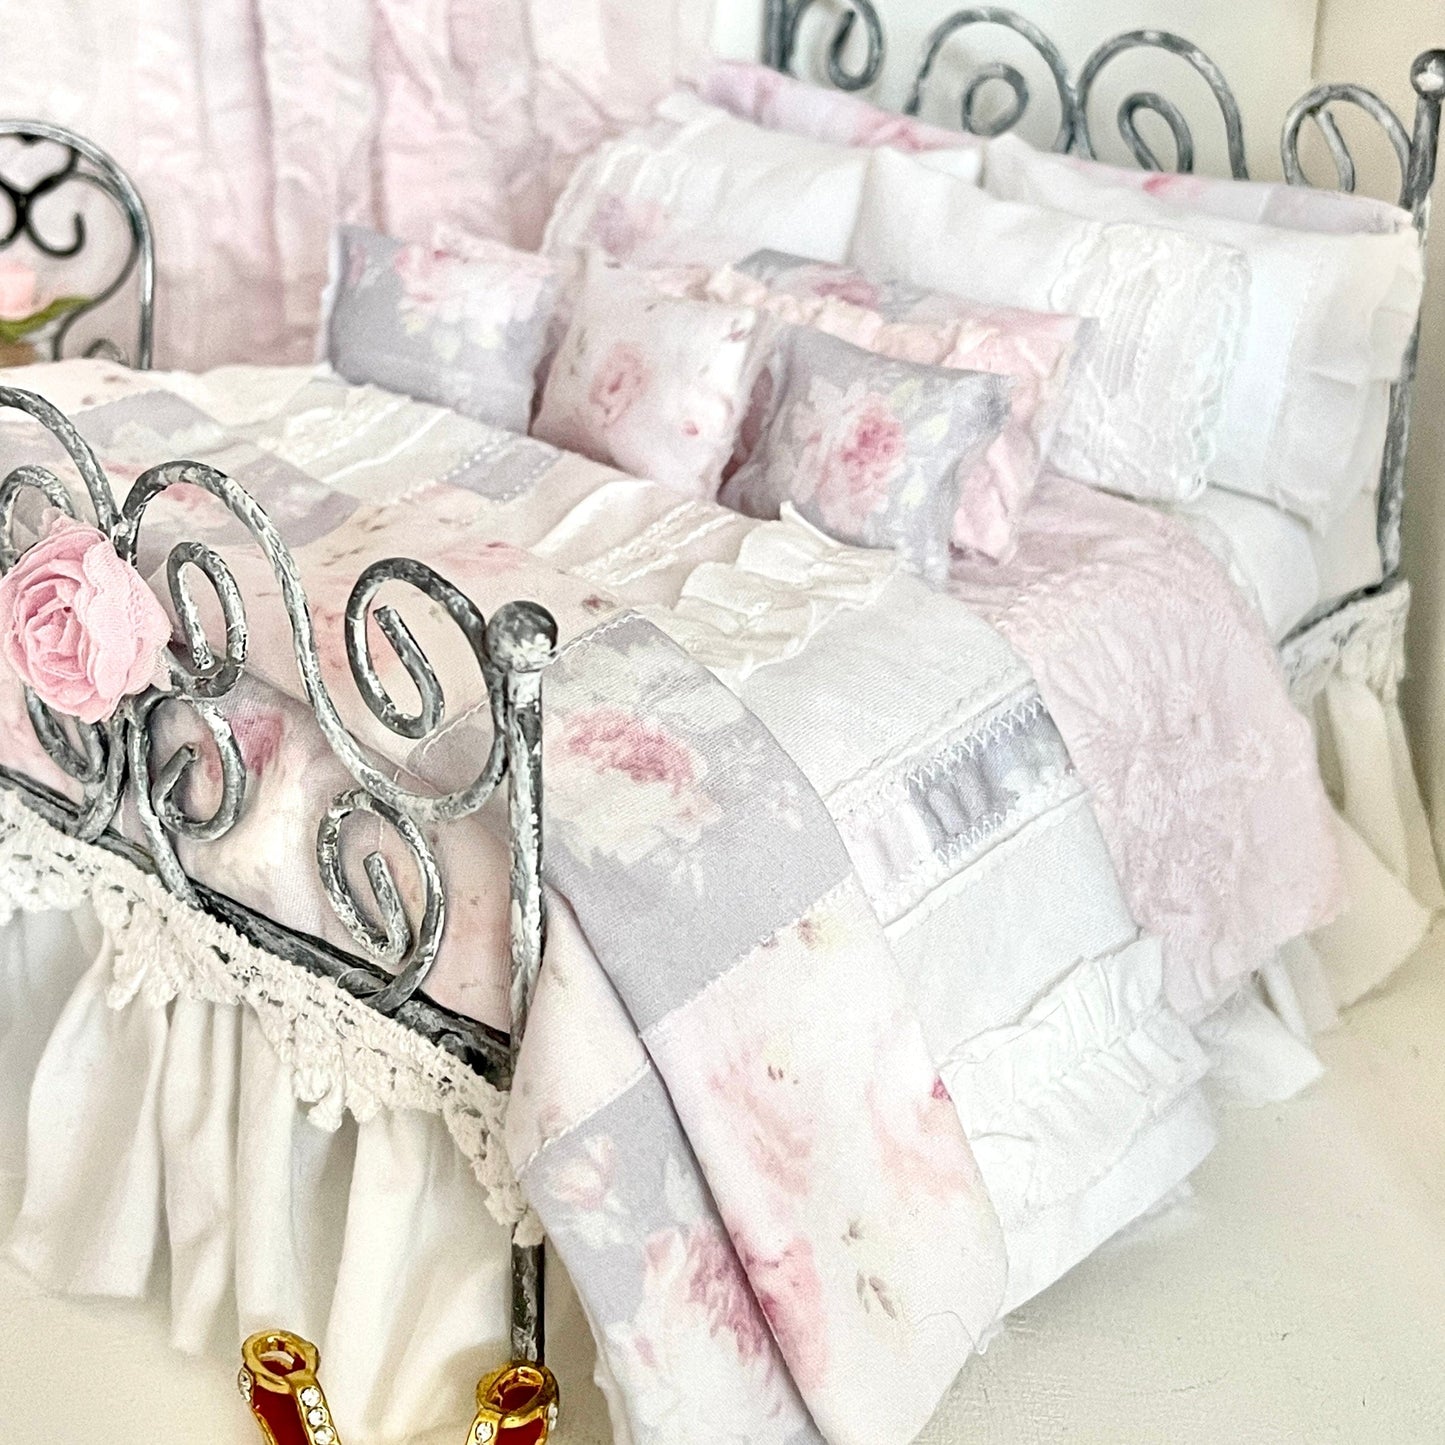 Chantallena Doll House dressed bed Dressed Bed | Shabby Cotton with Pink Roses and Gray Accents Bedding | Rosalie